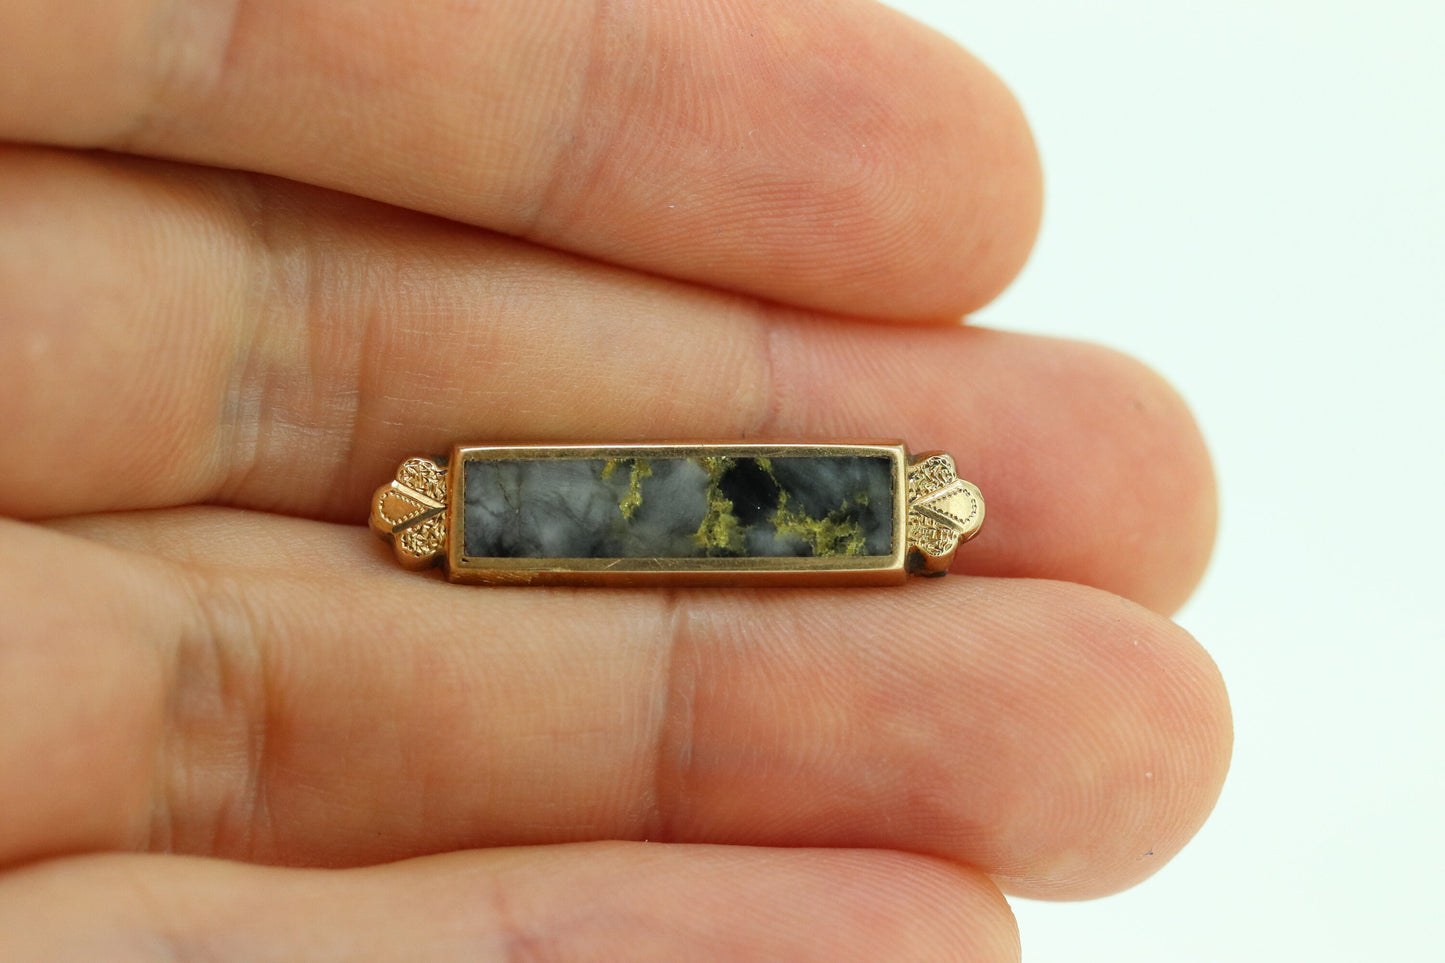 10k Quartz Agate Seed Victorian Lingerie bar brooch or lingerie pin. Gold Vein Agate brooch pin. st(55)